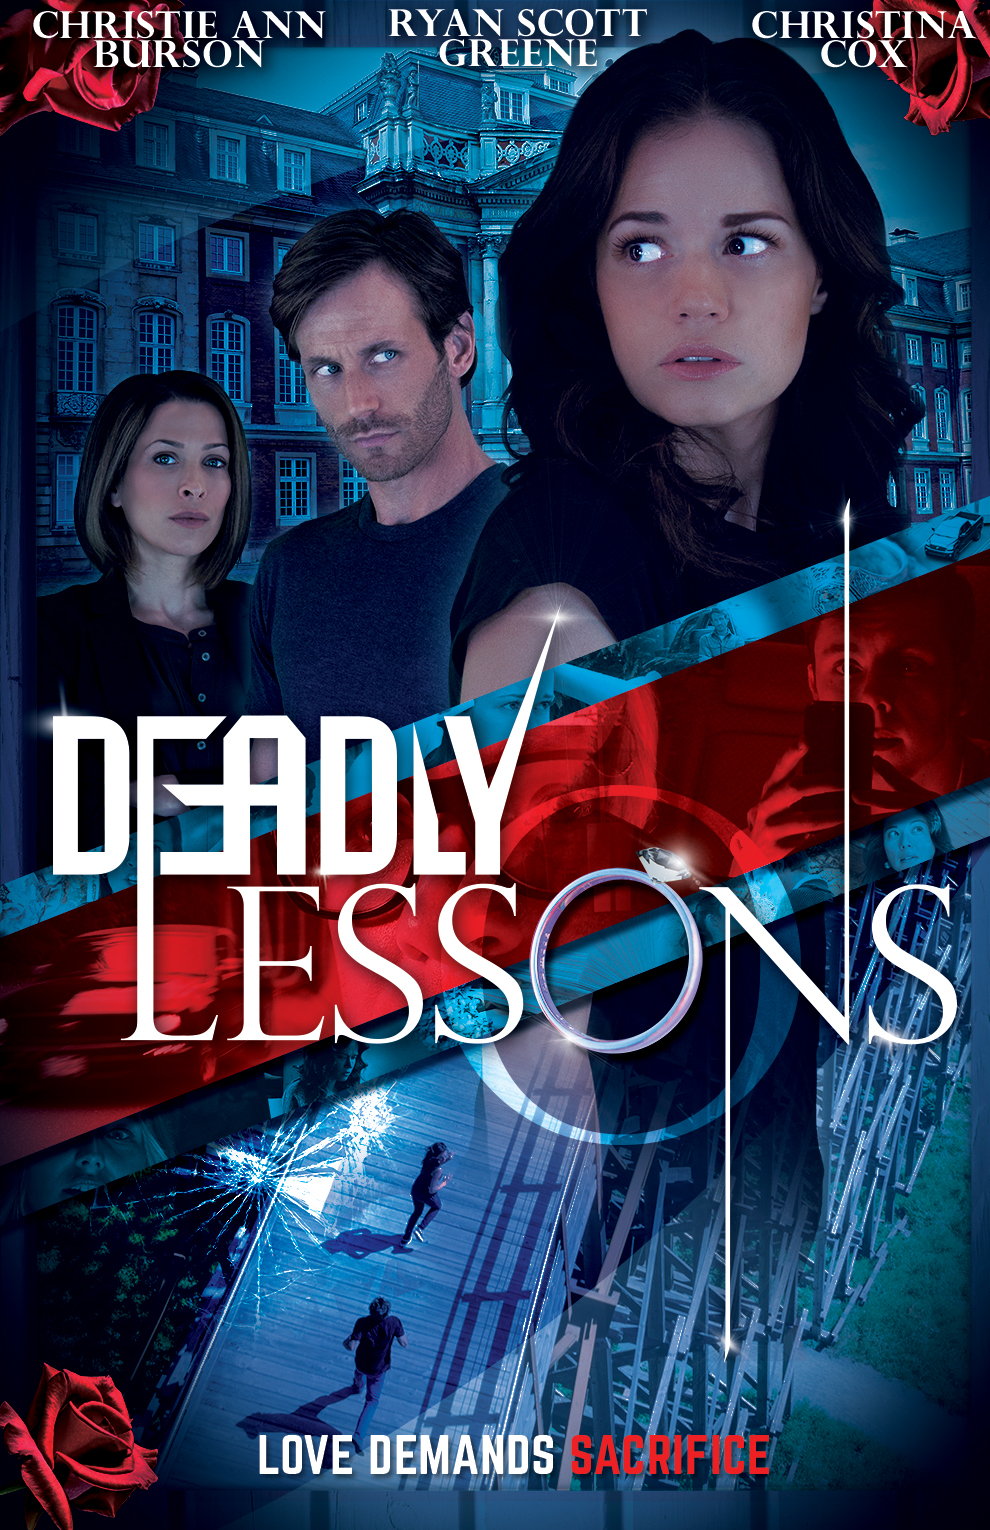 Deadly Lessons (2017) starring Christie Burson on DVD on DVD